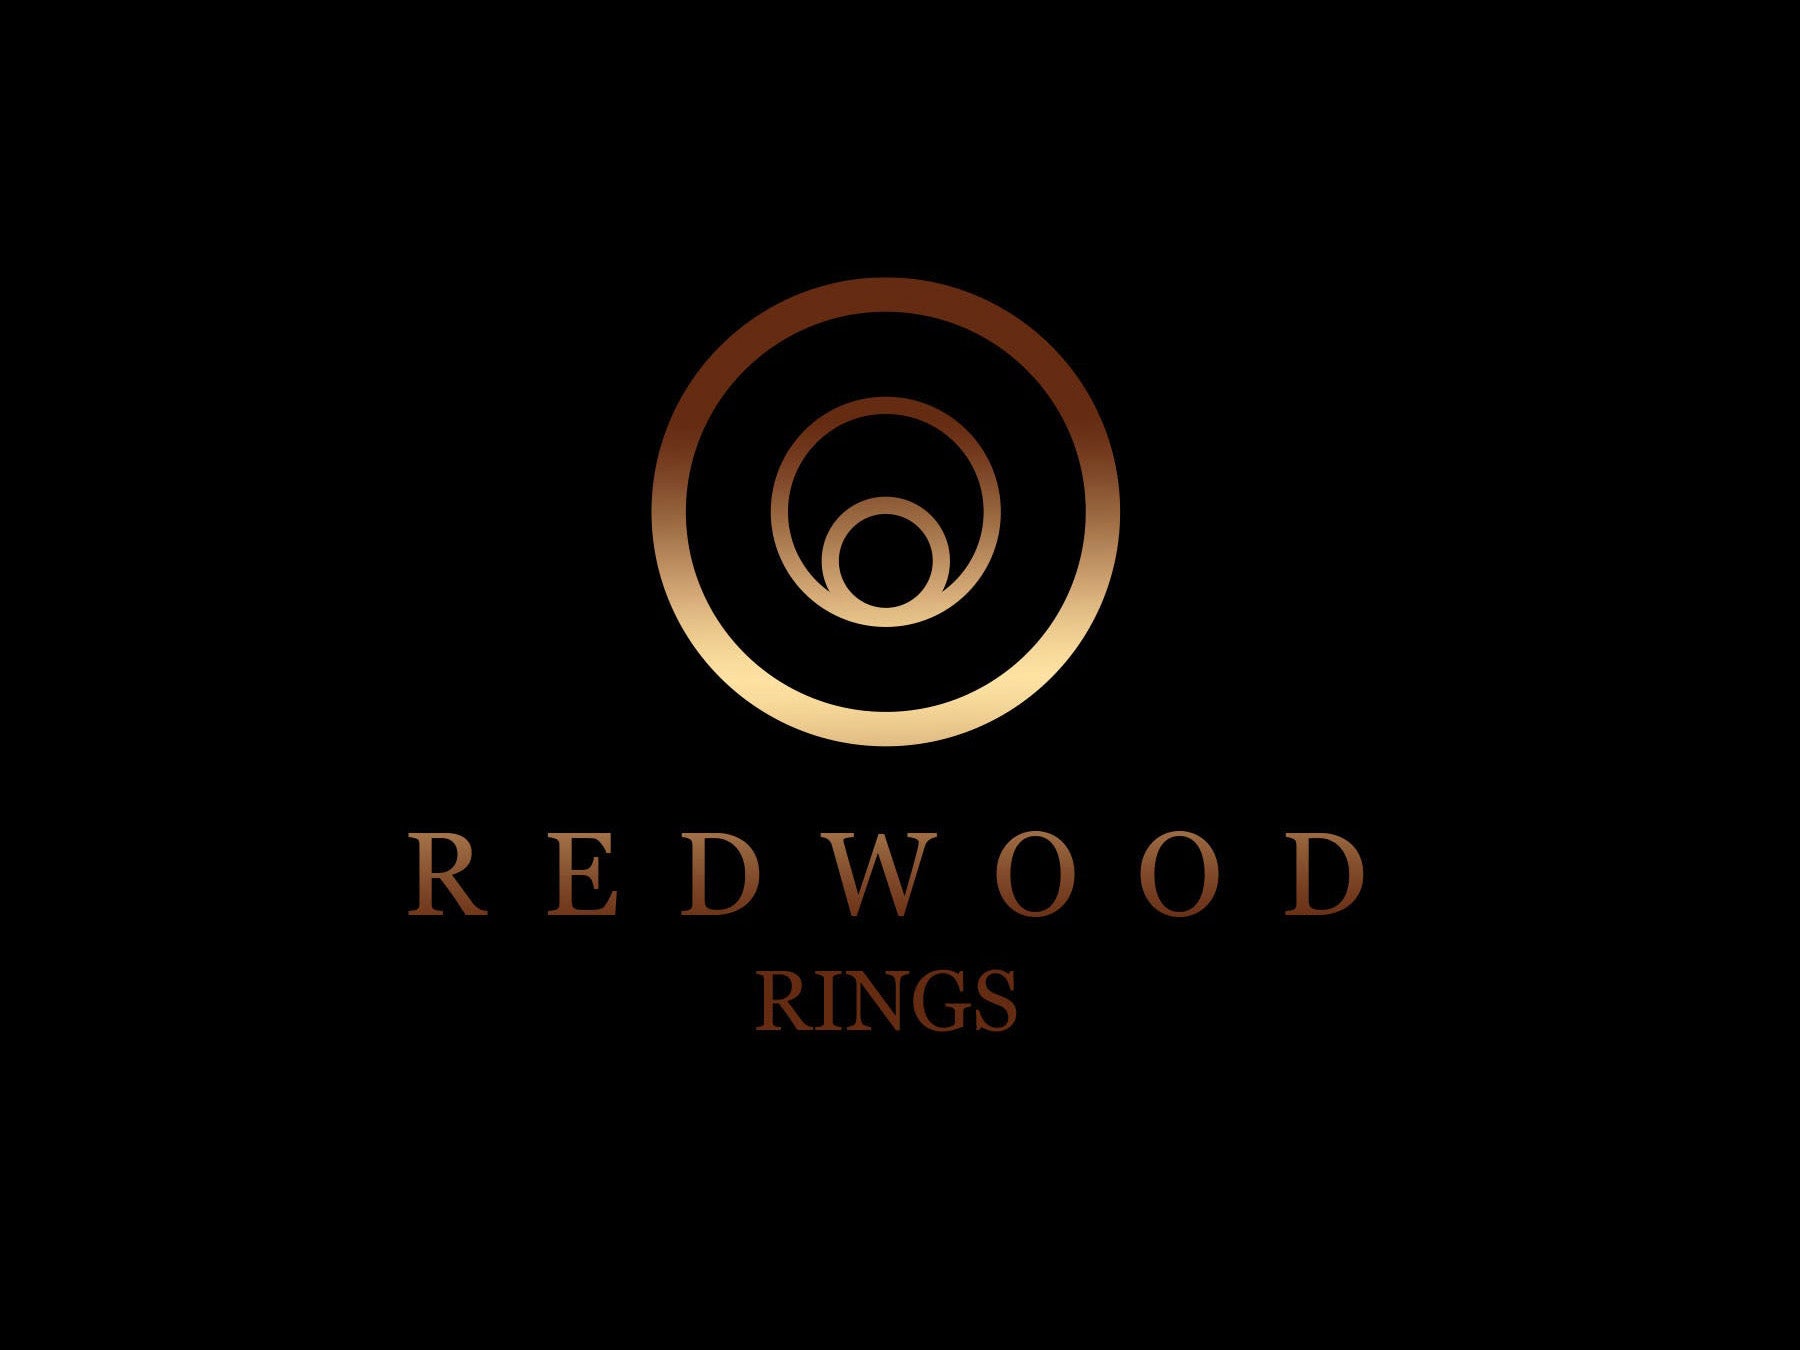 International Ring Size Chart by Redwood Rings, ring size guide for US and European sizes, millimeter diameter and circumference